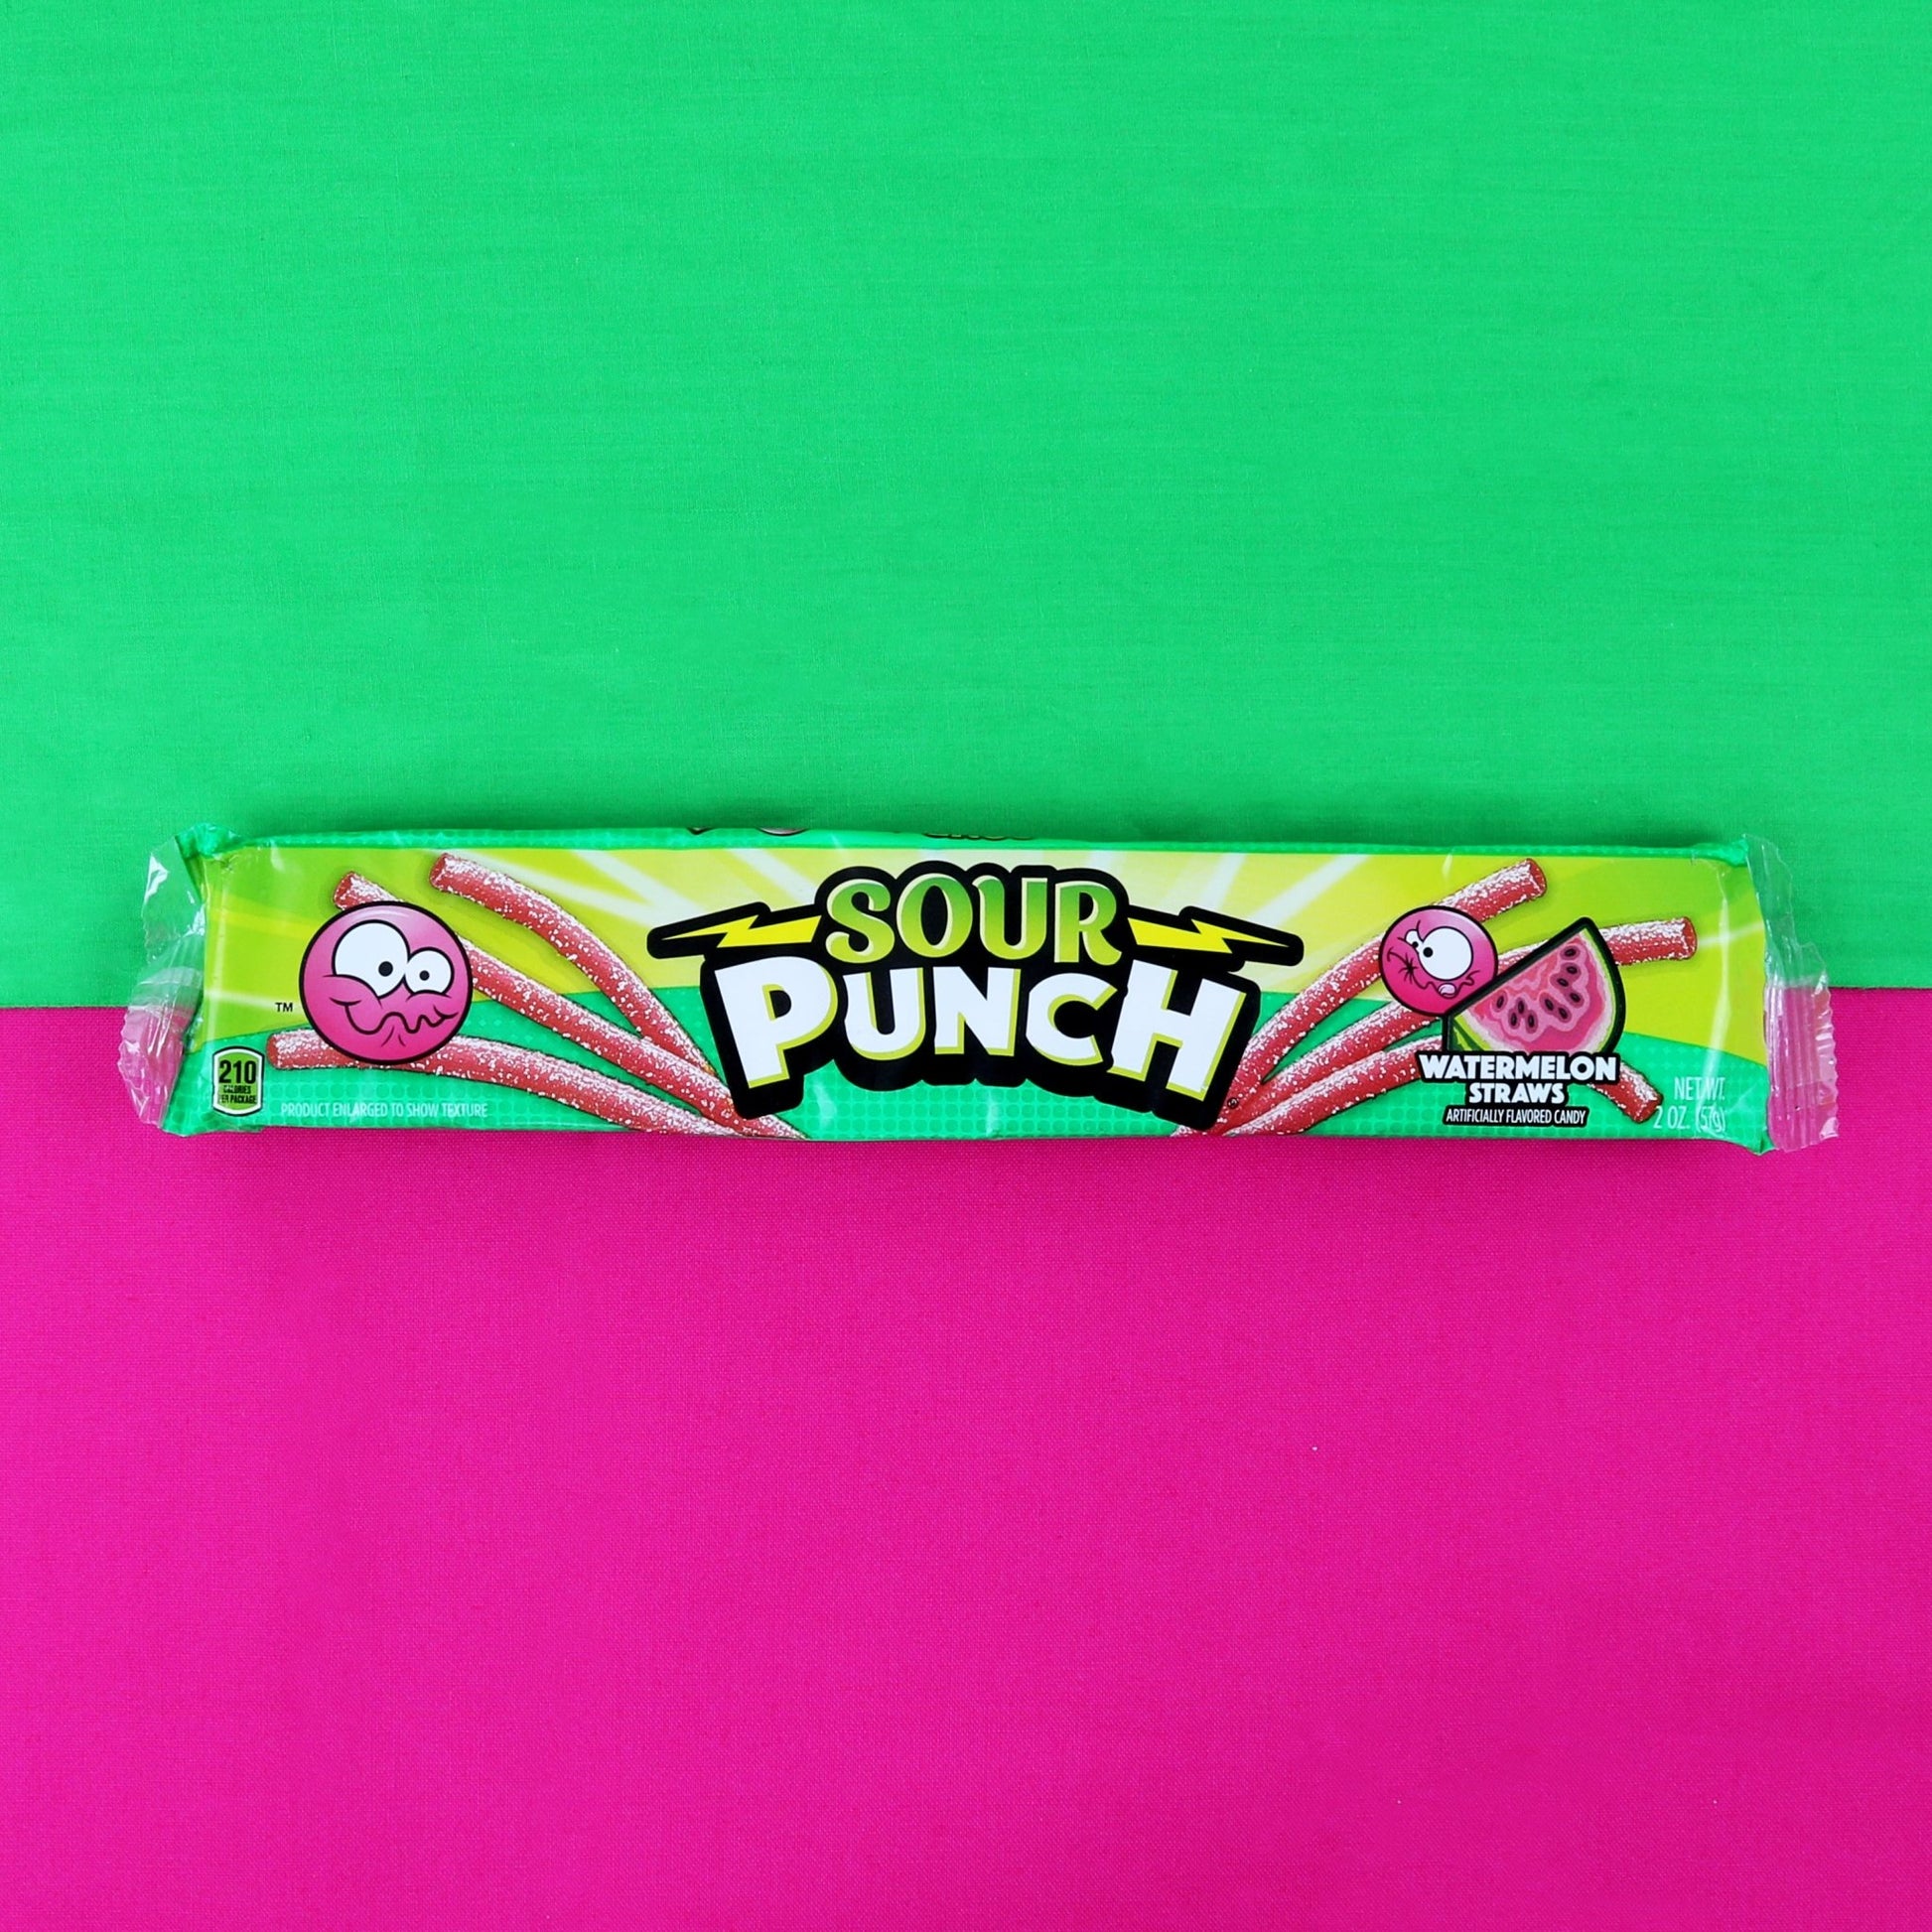 Sour Punch Watermelon Straws 2oz Tray on a watermelon colored background